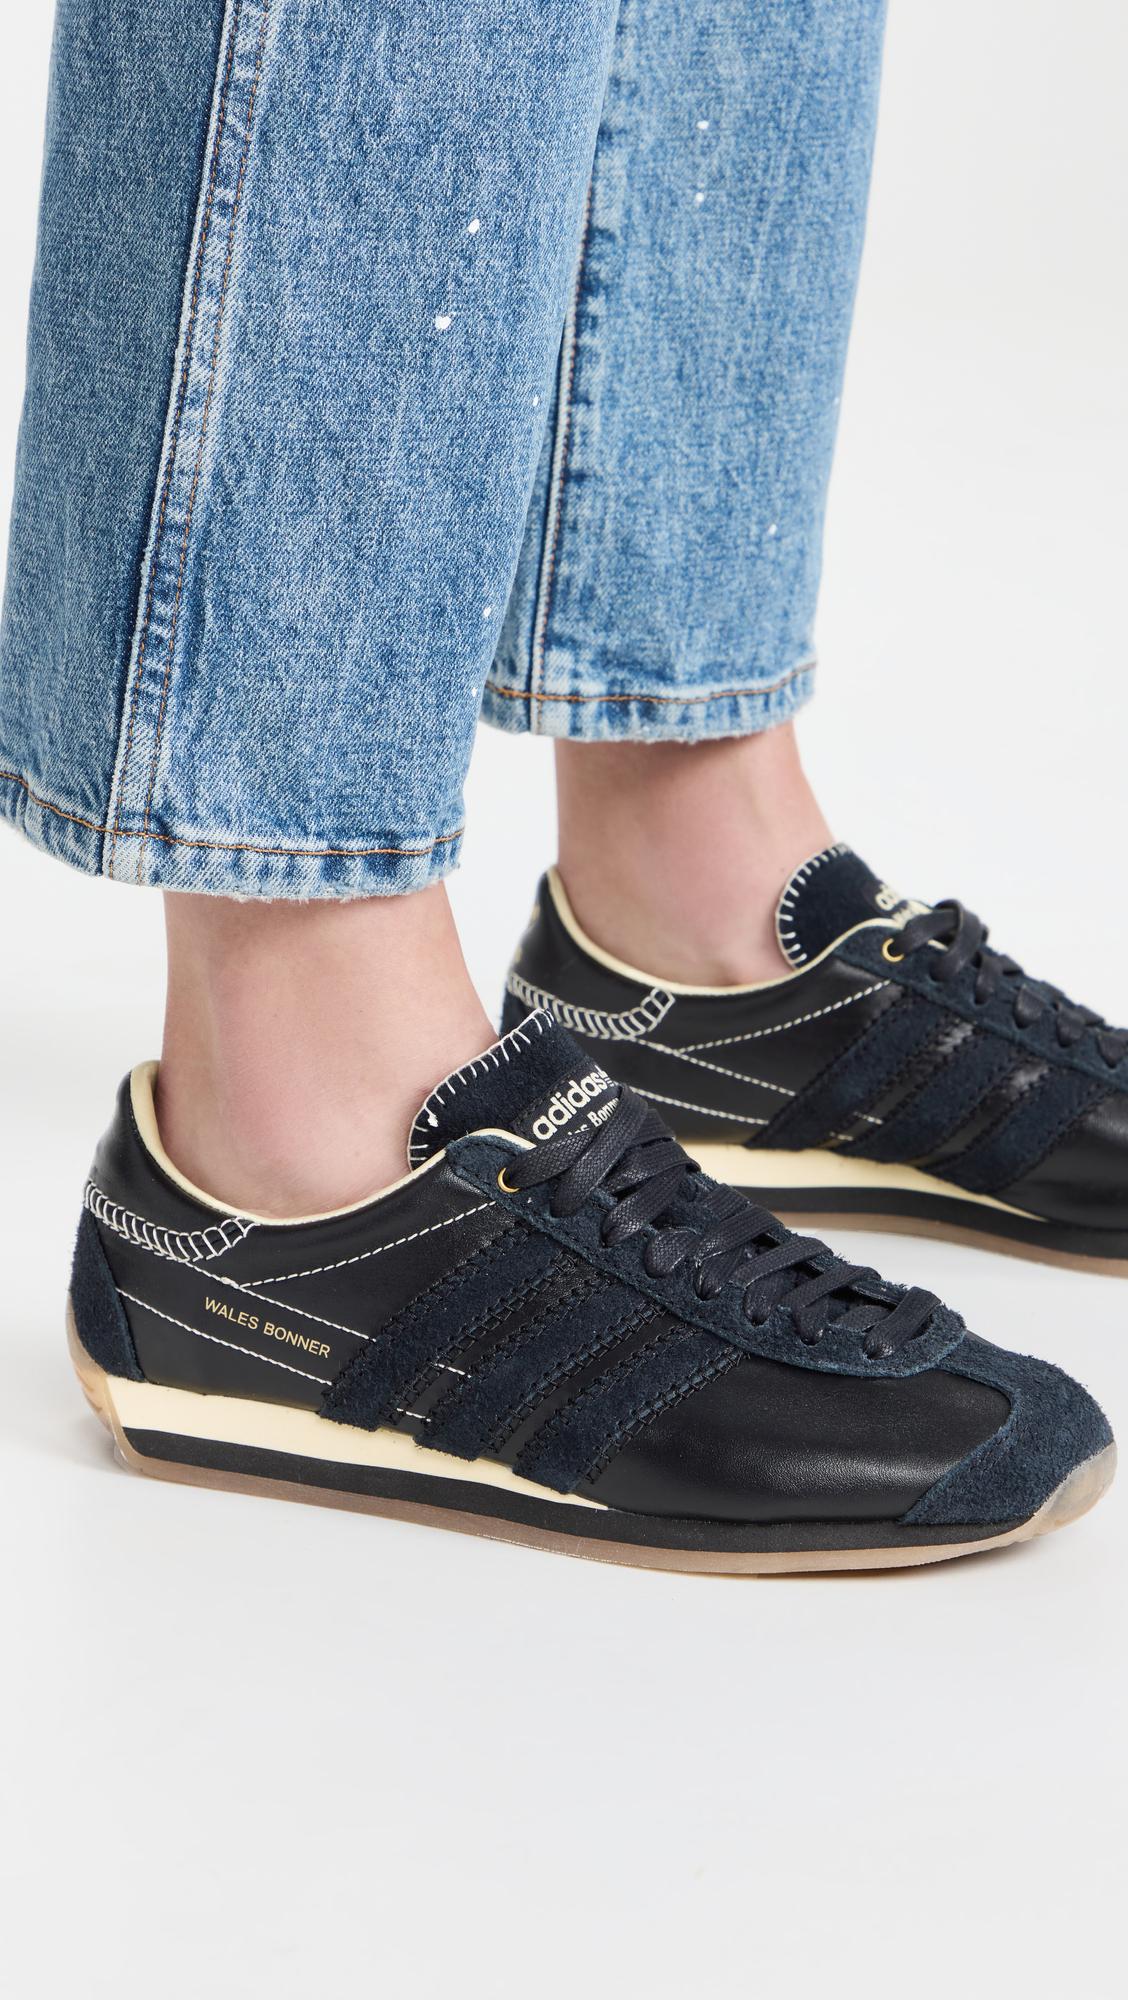 adidas X Wales Bonner Country Sneakers in Black | Lyst